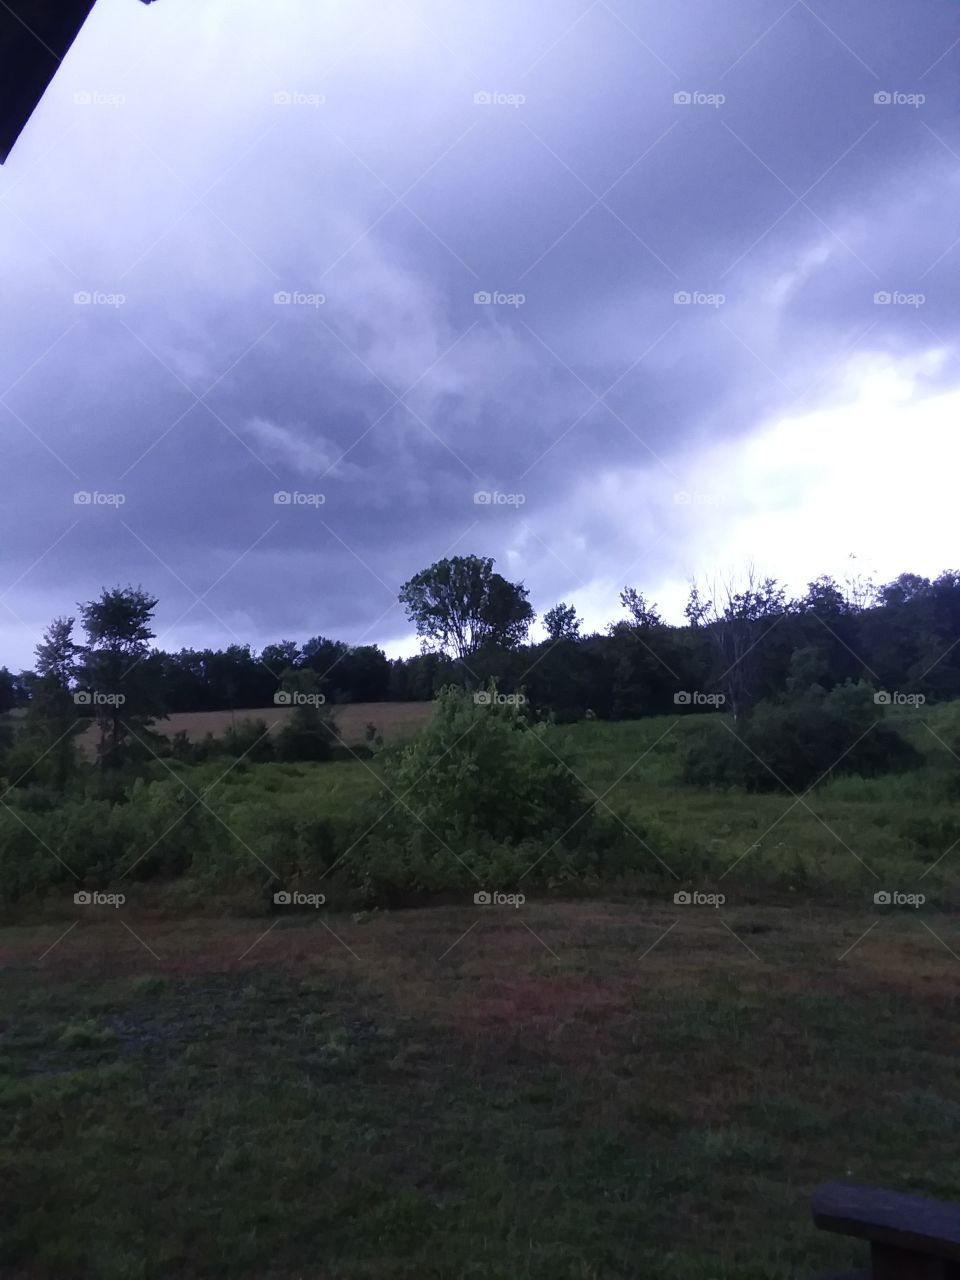 storm coming in